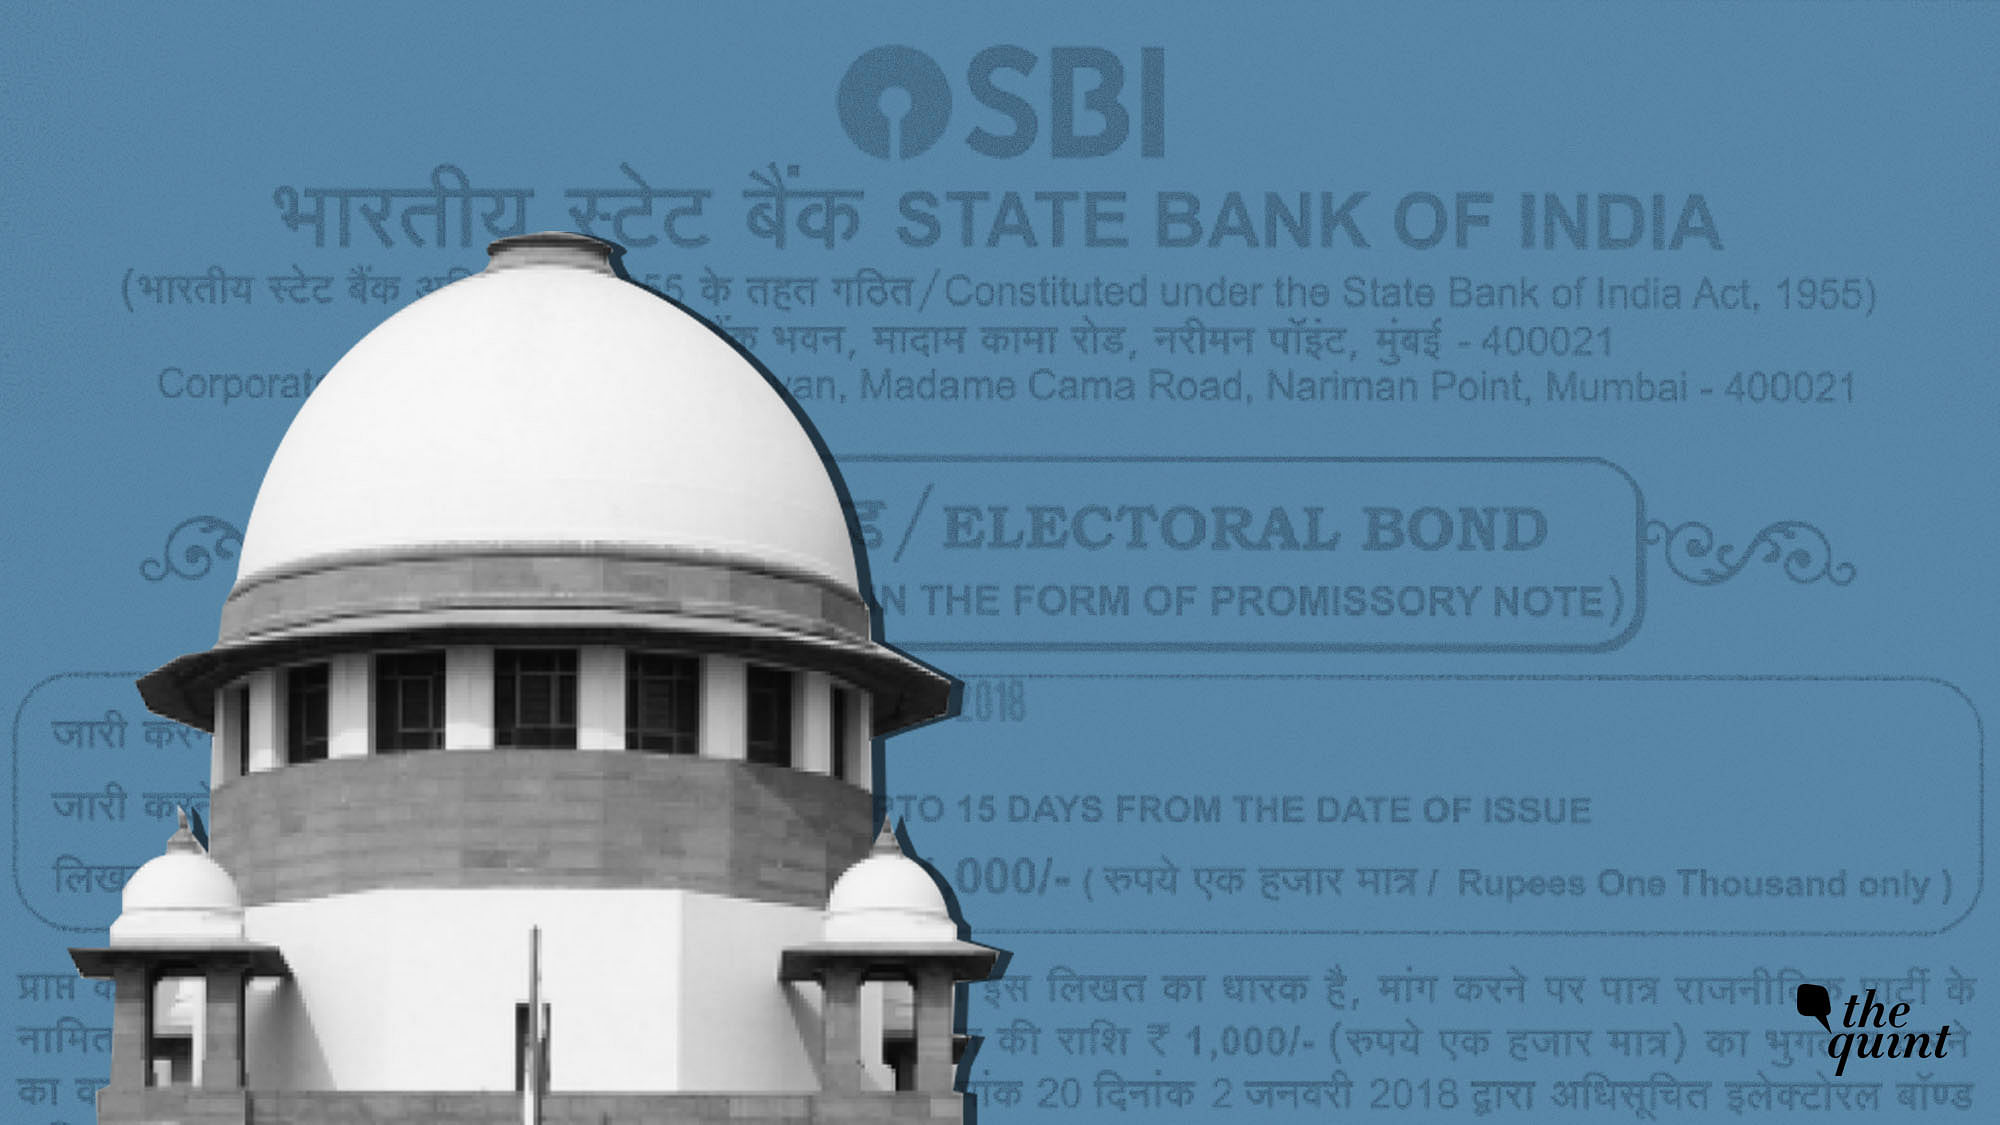 The Supreme Court heard arguments about the constitutionality of the electoral bonds scheme.